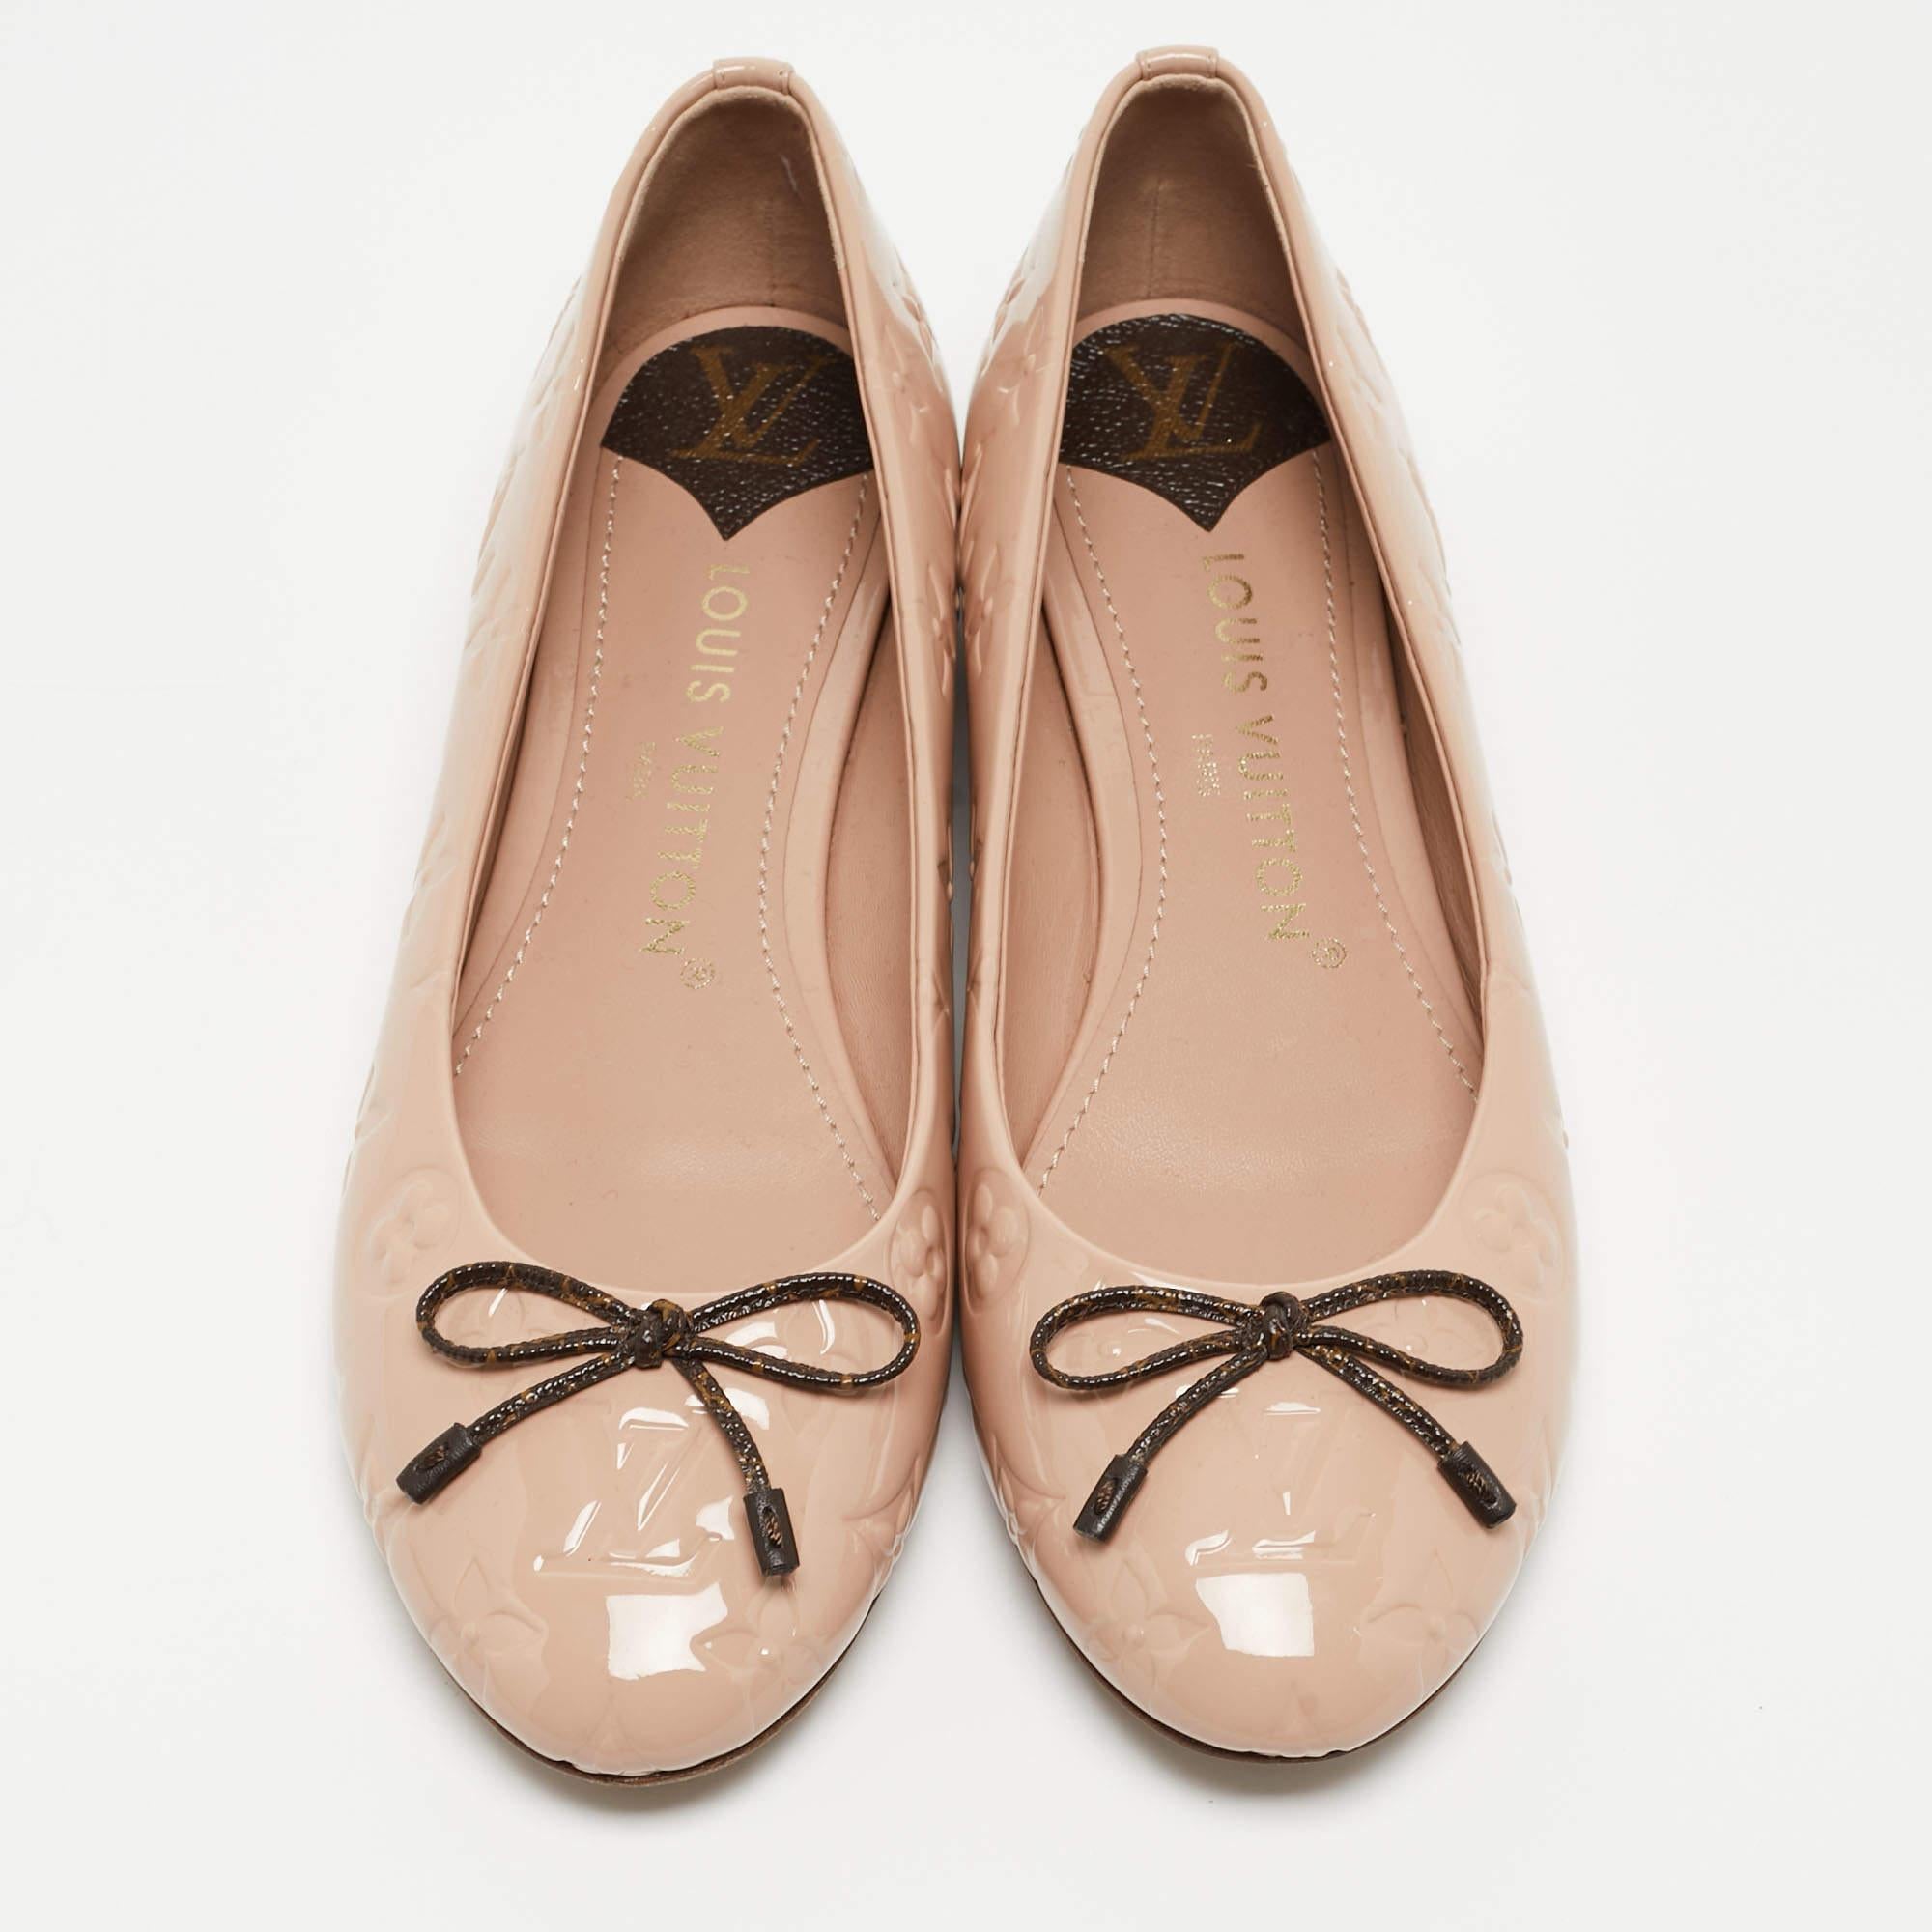 Step into sophistication and comfort with these Louis Vuitton ballet flats for women. Exquisitely crafted, these versatile shoes blend timeless elegance with everyday ease, ensuring a stylish and relaxed stride.

